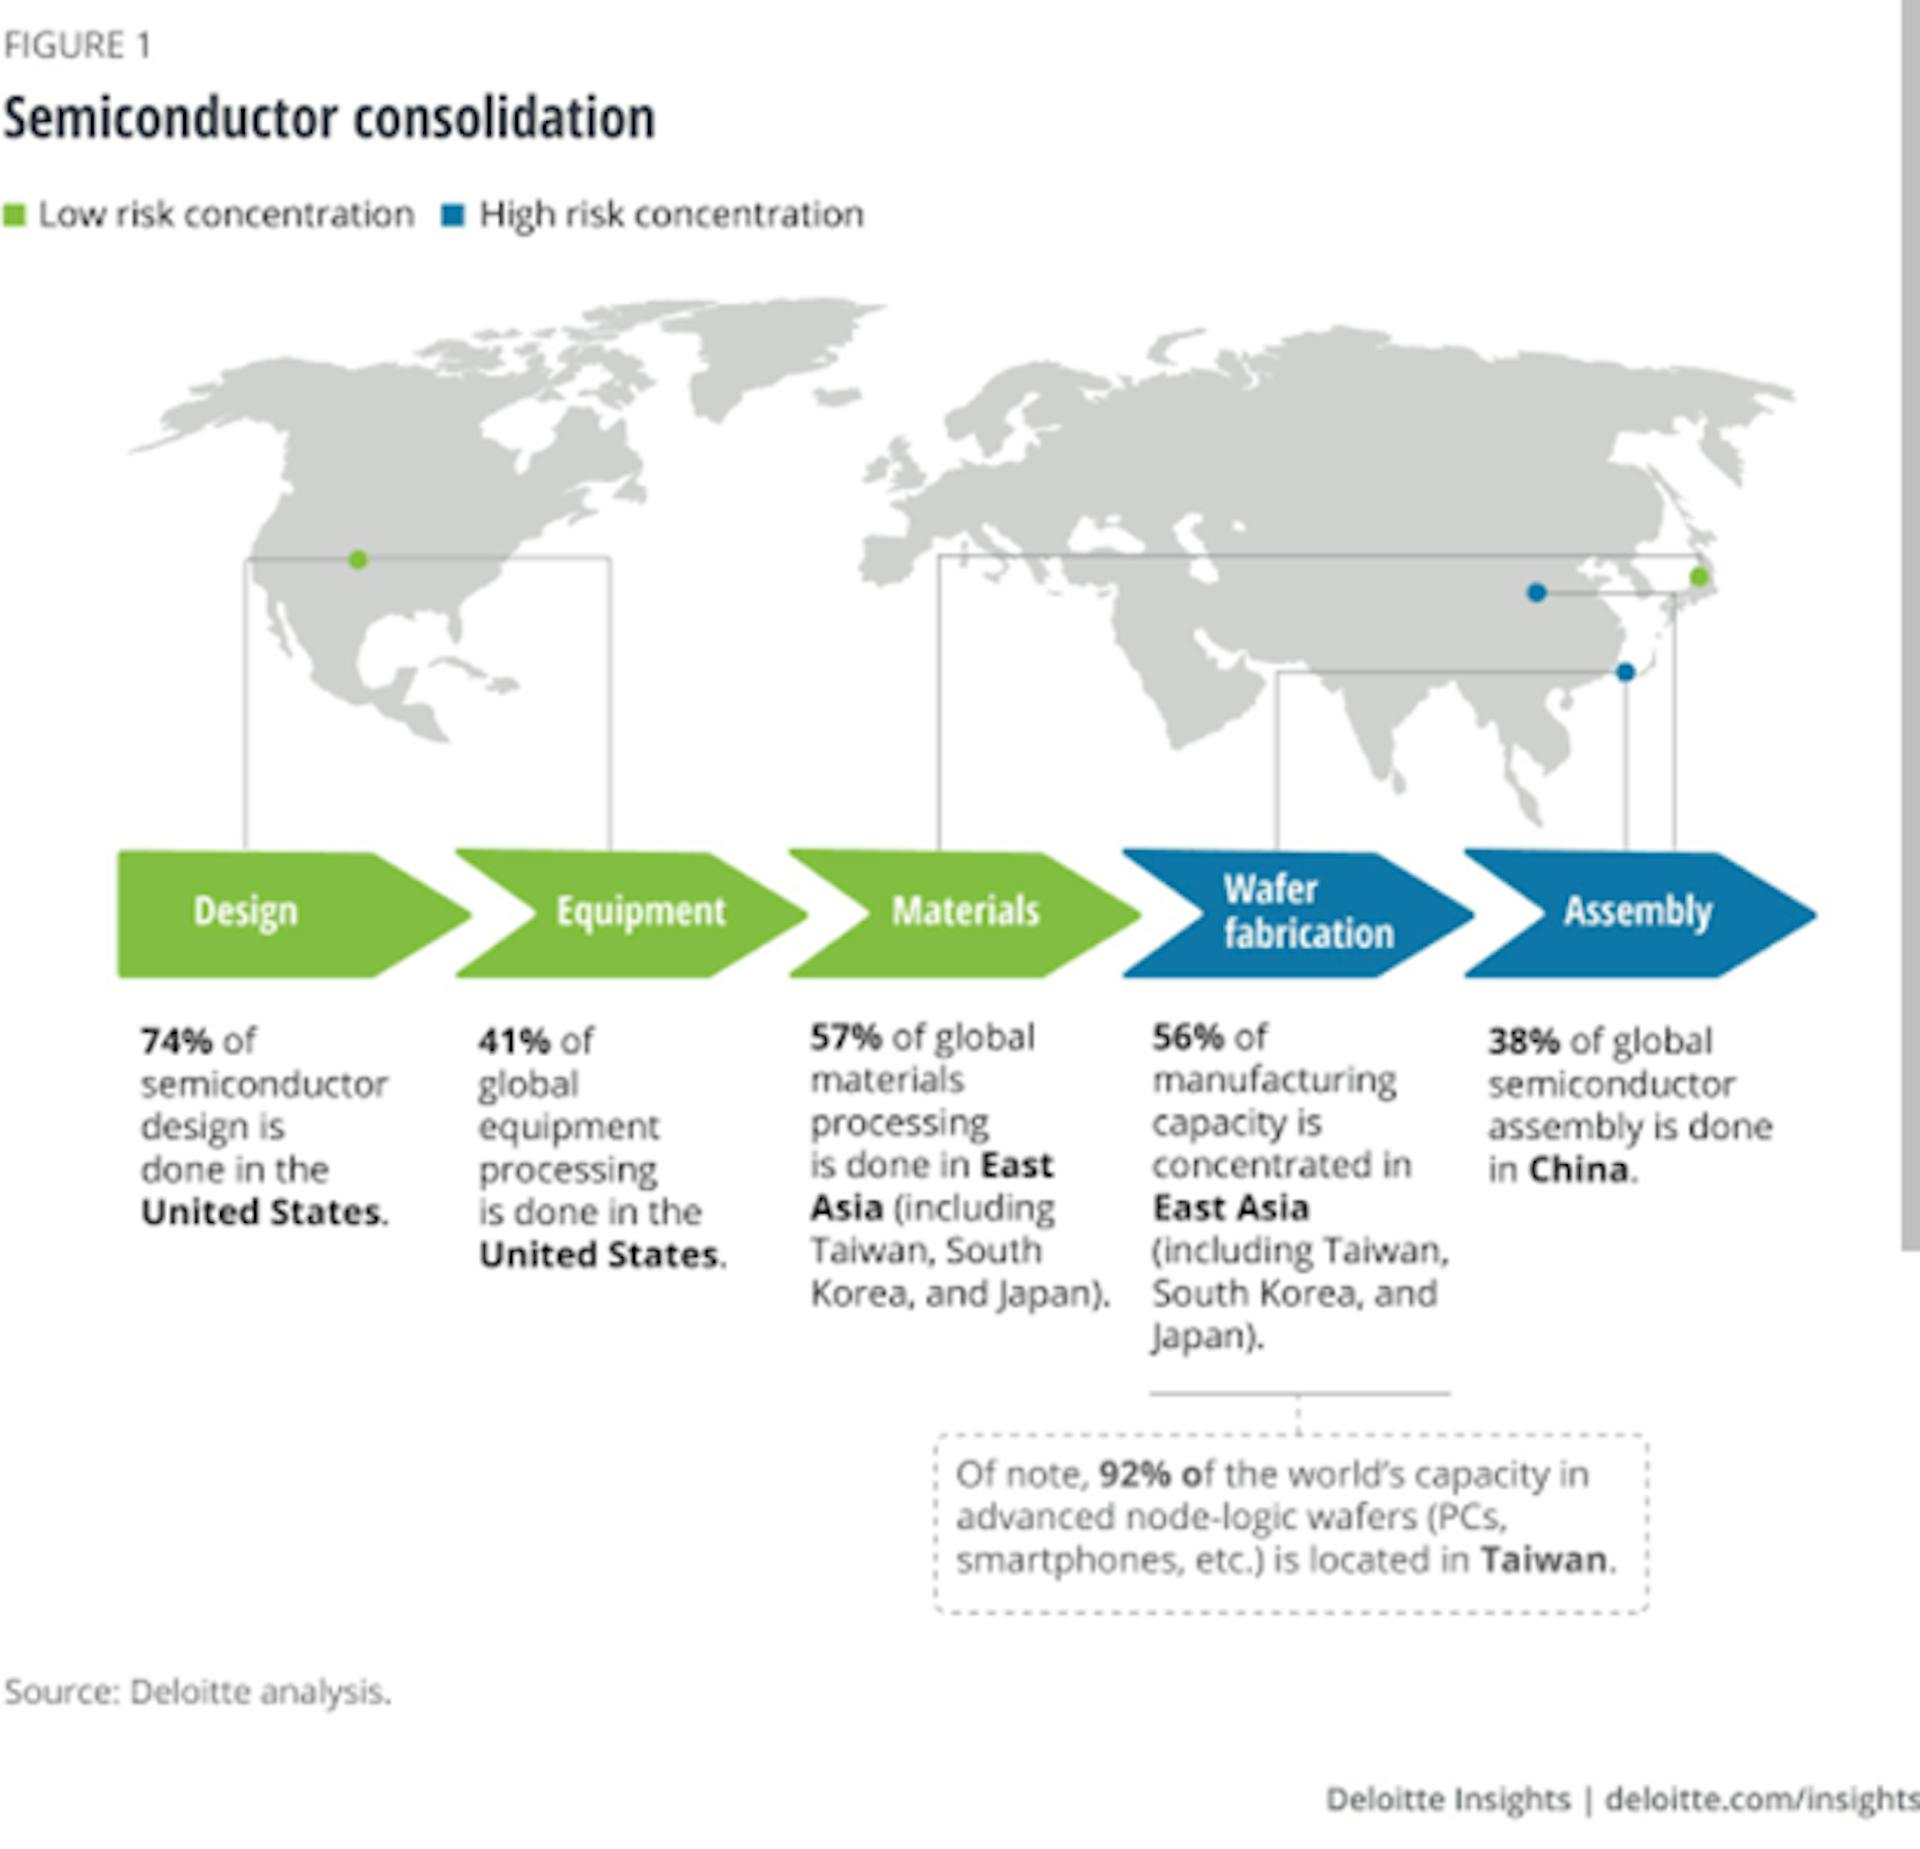 How an Outsourcing Network Operates for Semiconductors; Source: Deloitte 